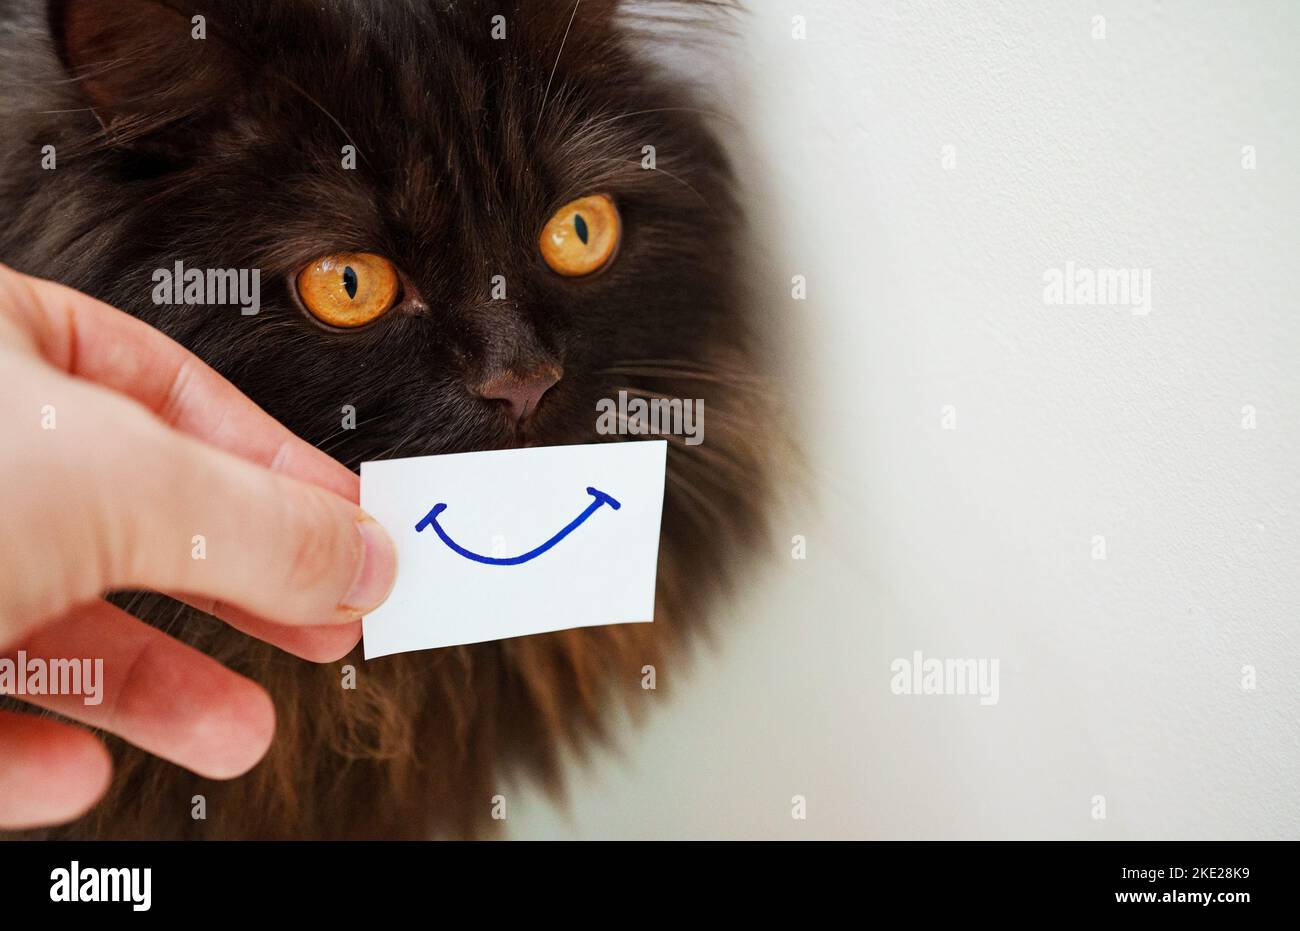 Funny scottish straight cat with smile on card. Stock Photo